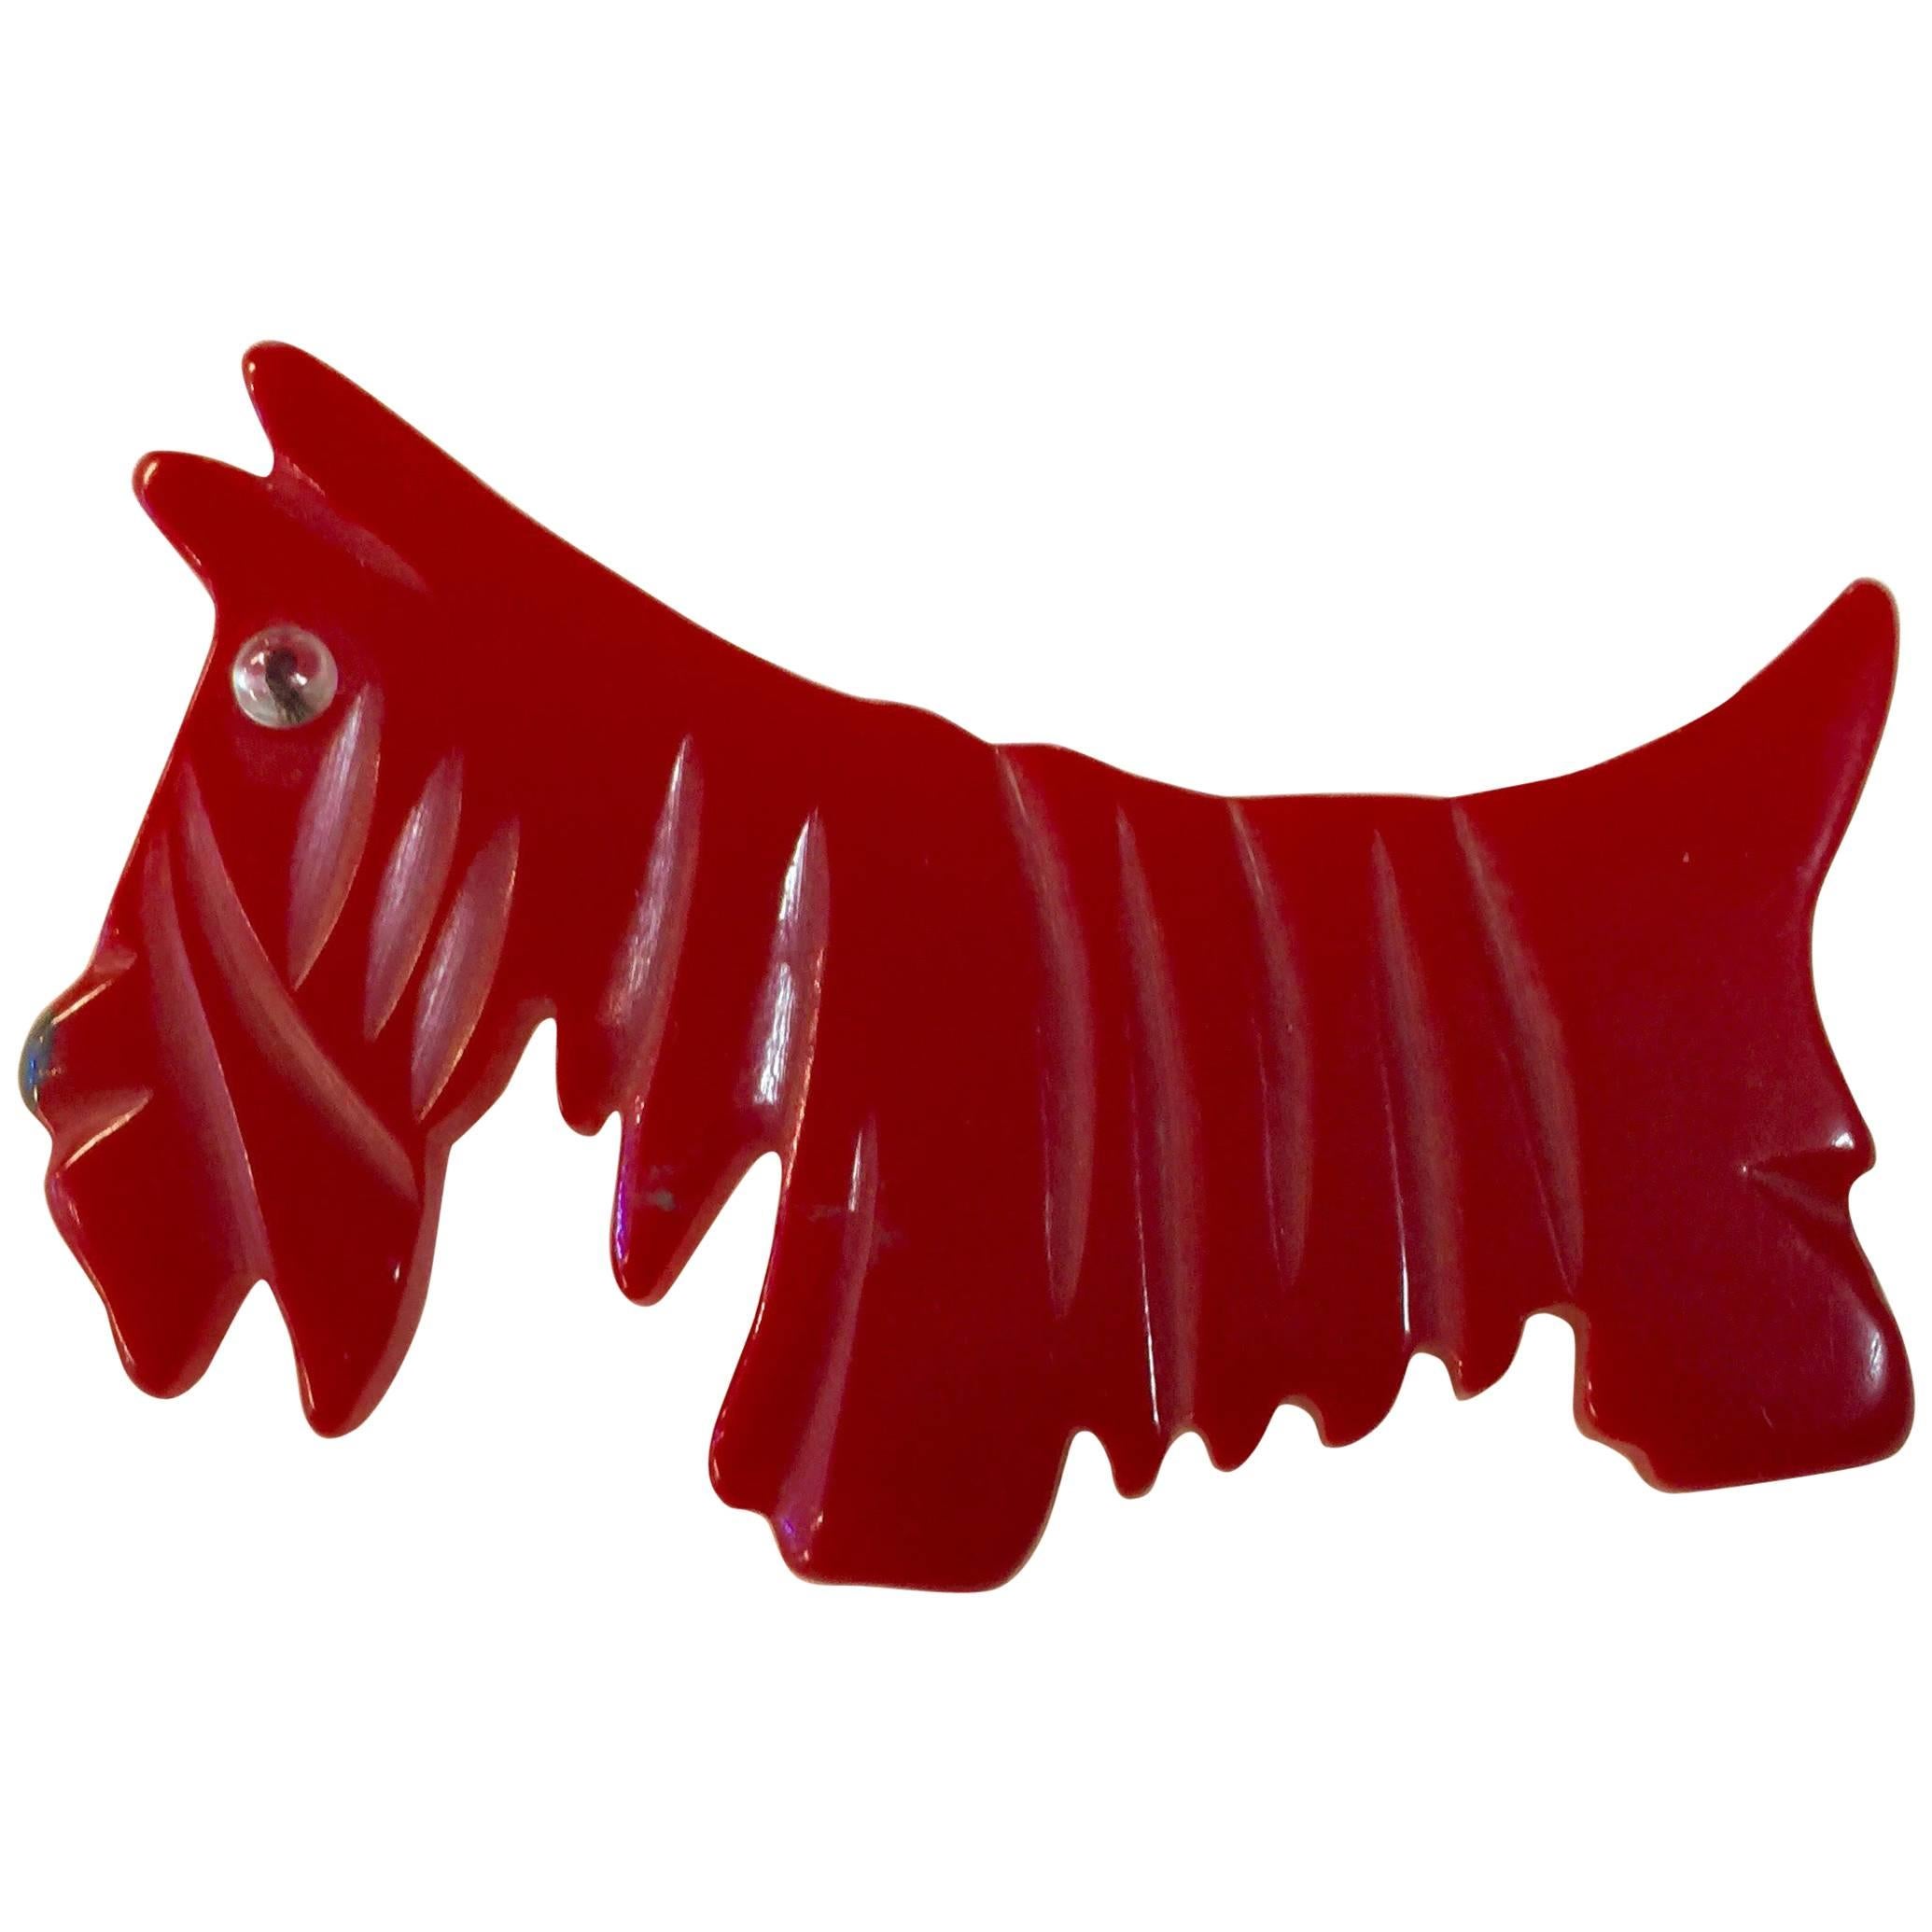 1930s RED Bakelite Scotty Dog Brooch Pin For Sale